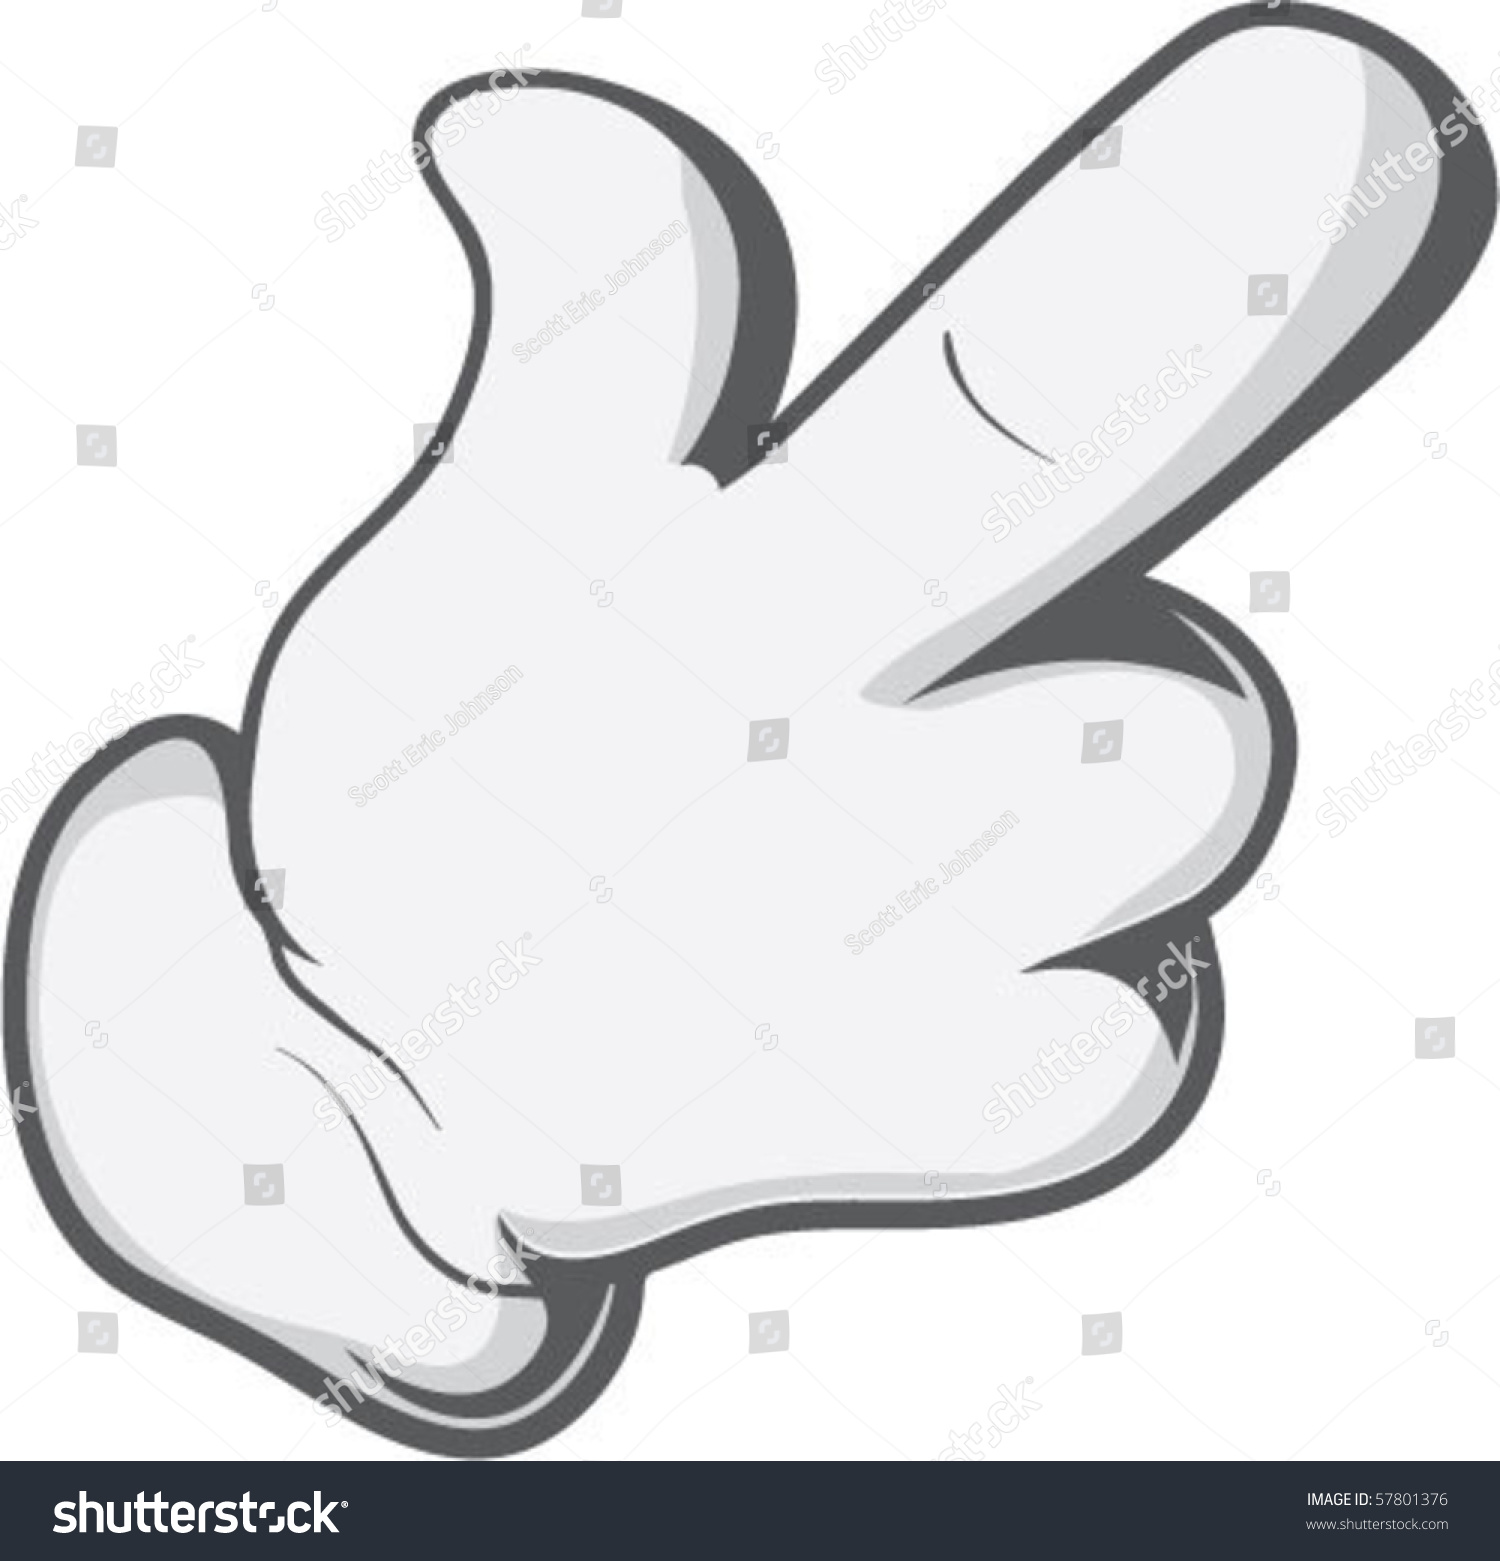 Pointing Hand Stock Vector 57801376 : Shutterstock